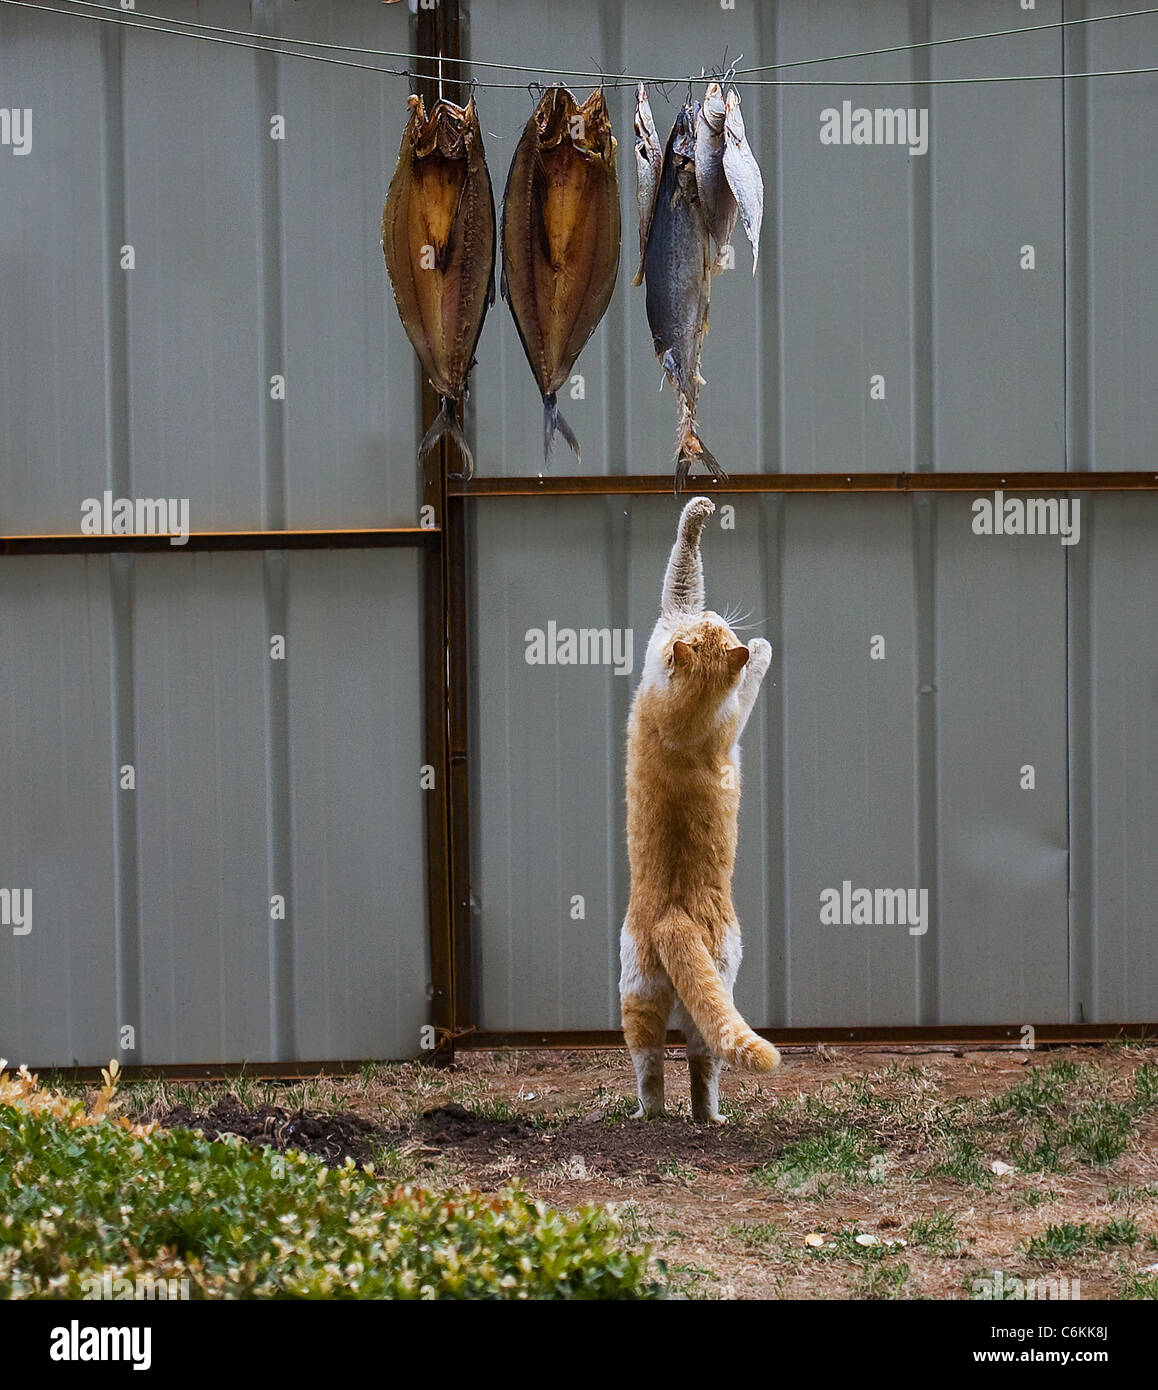 Greedy cat smells something fishy This greedy cat tries desperately to get its claws on some tasty dried fish. The fat feline Stock Photo